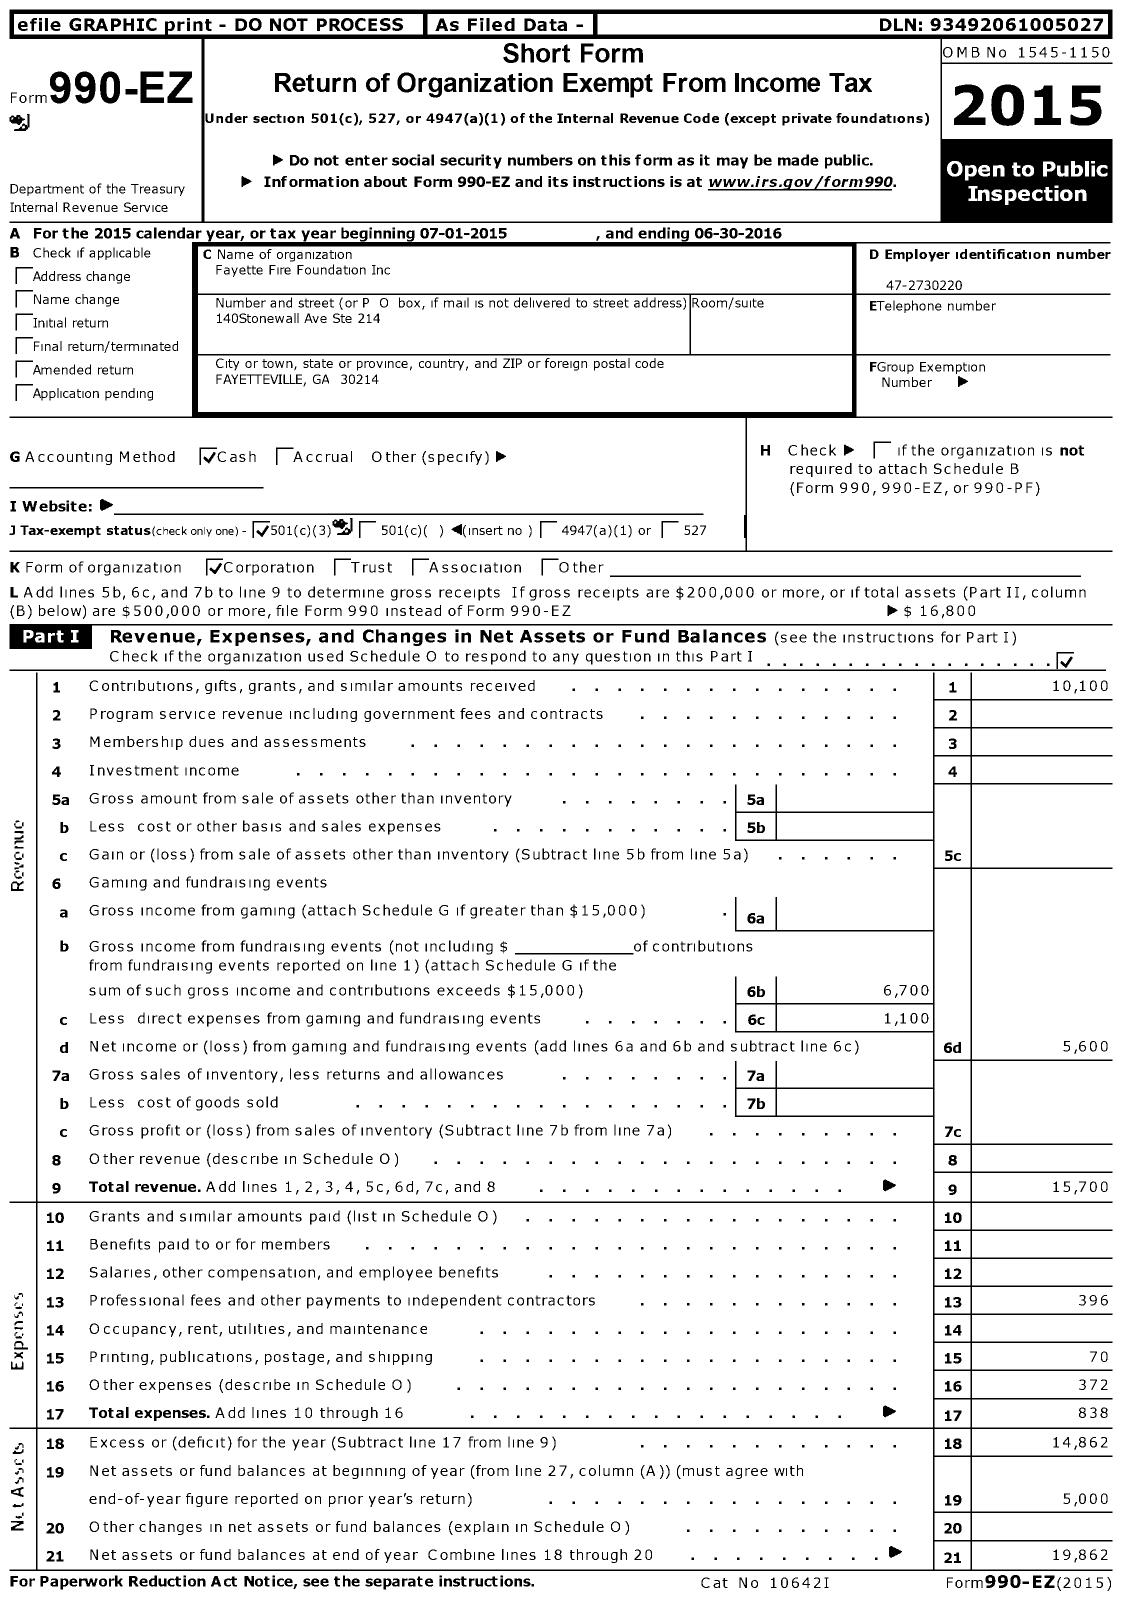 Image of first page of 2015 Form 990EZ for Fayette Fire Foundation